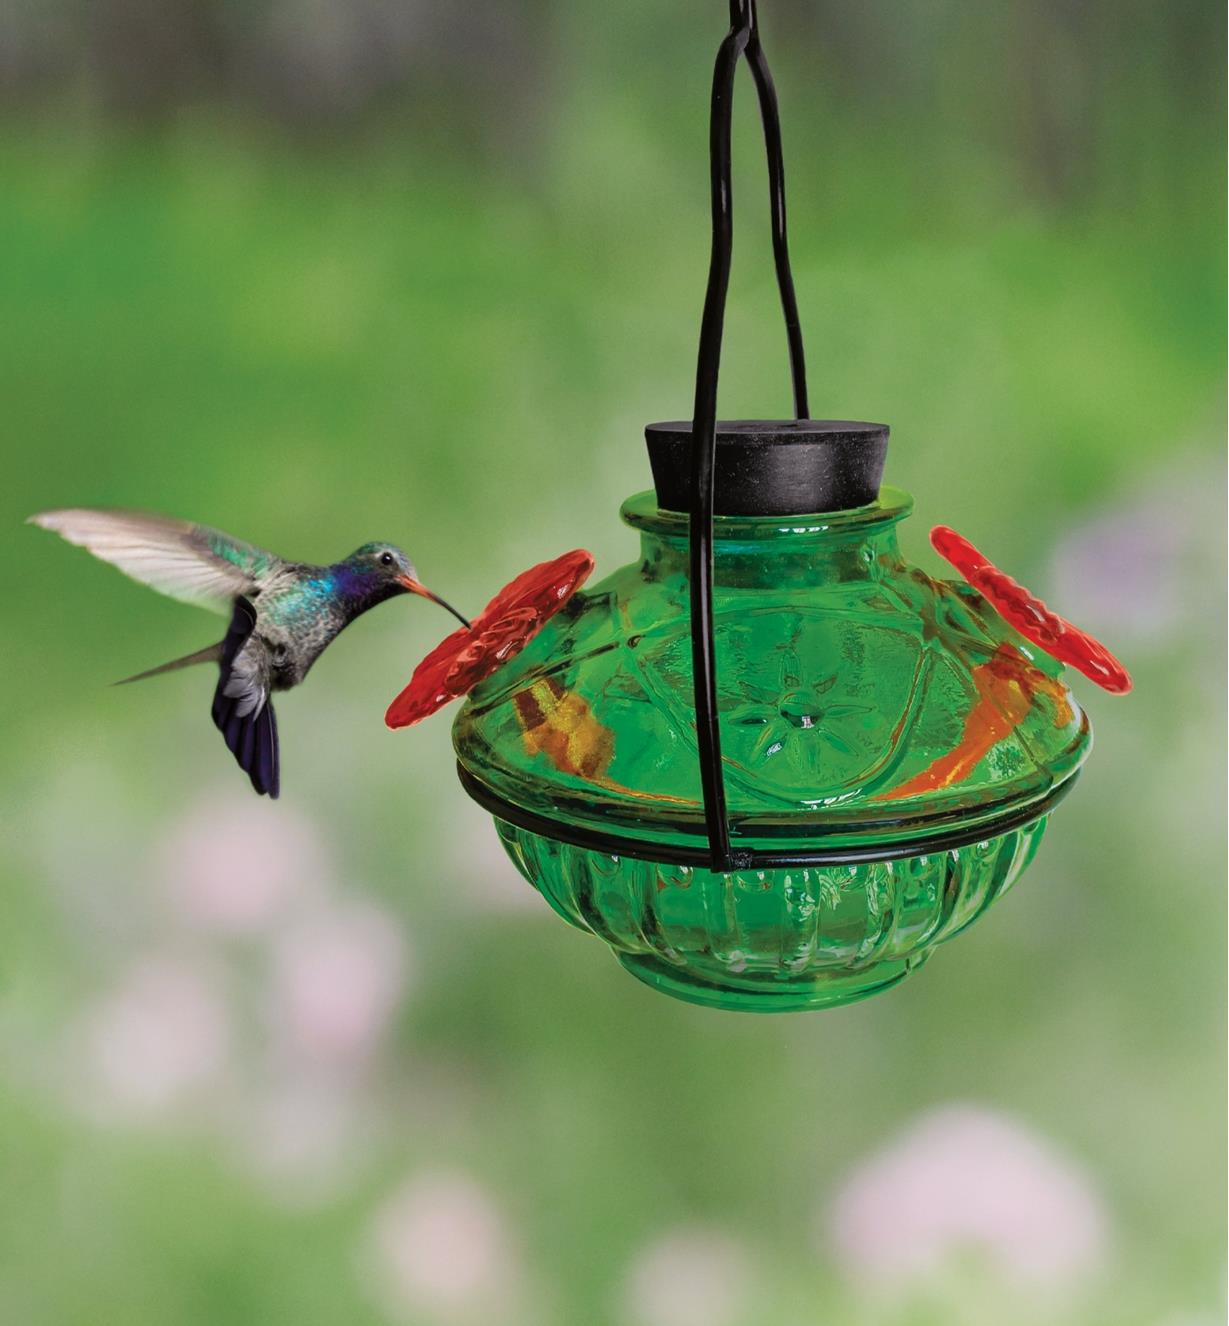 A hummingbird feeds from one of the two flower-shaped ports on the glass hummingbird feeder